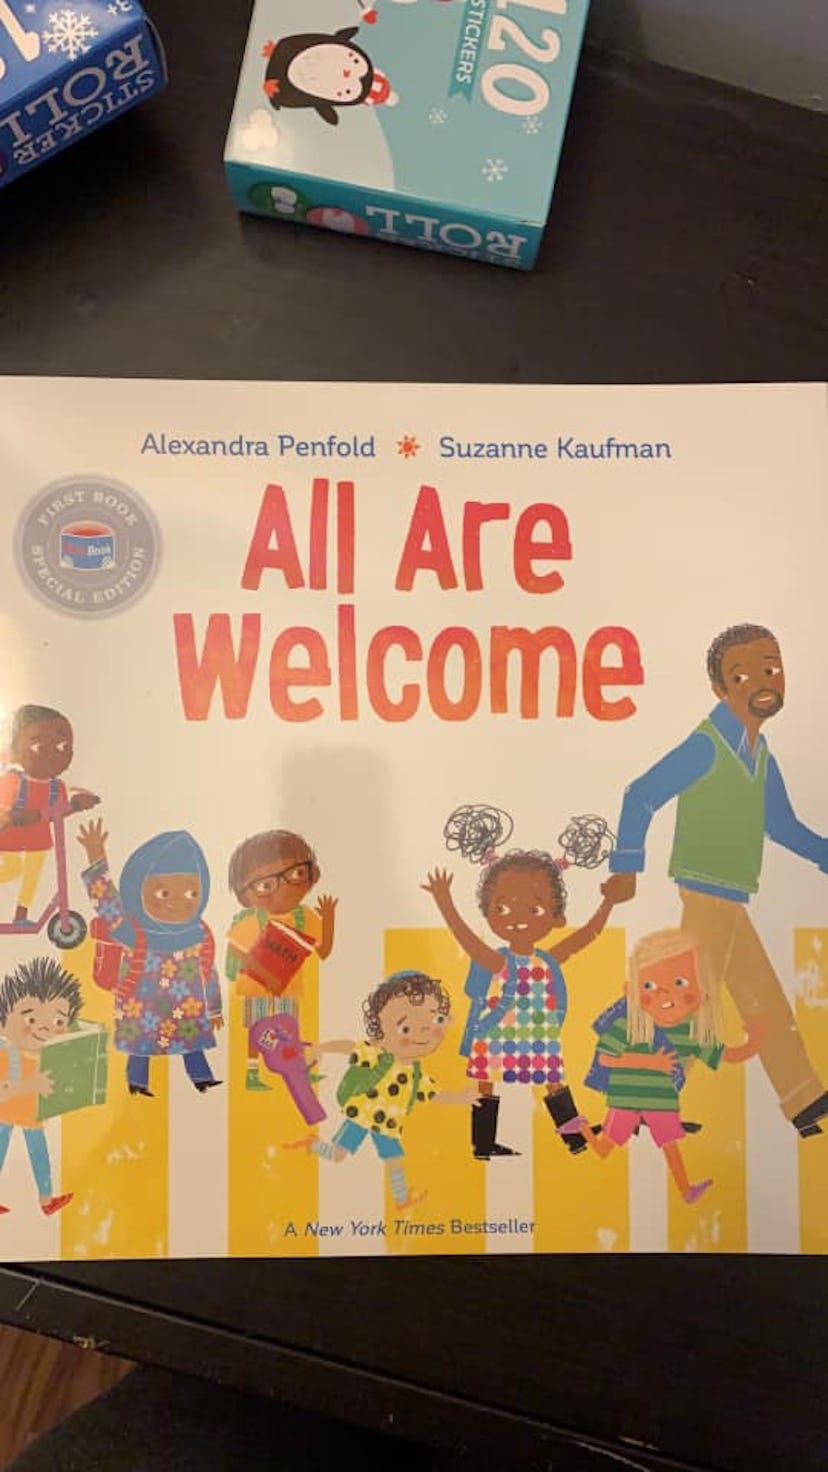 A copy of the book All Are Welcome by Alexandra Penfold and Suzanne Kaufman